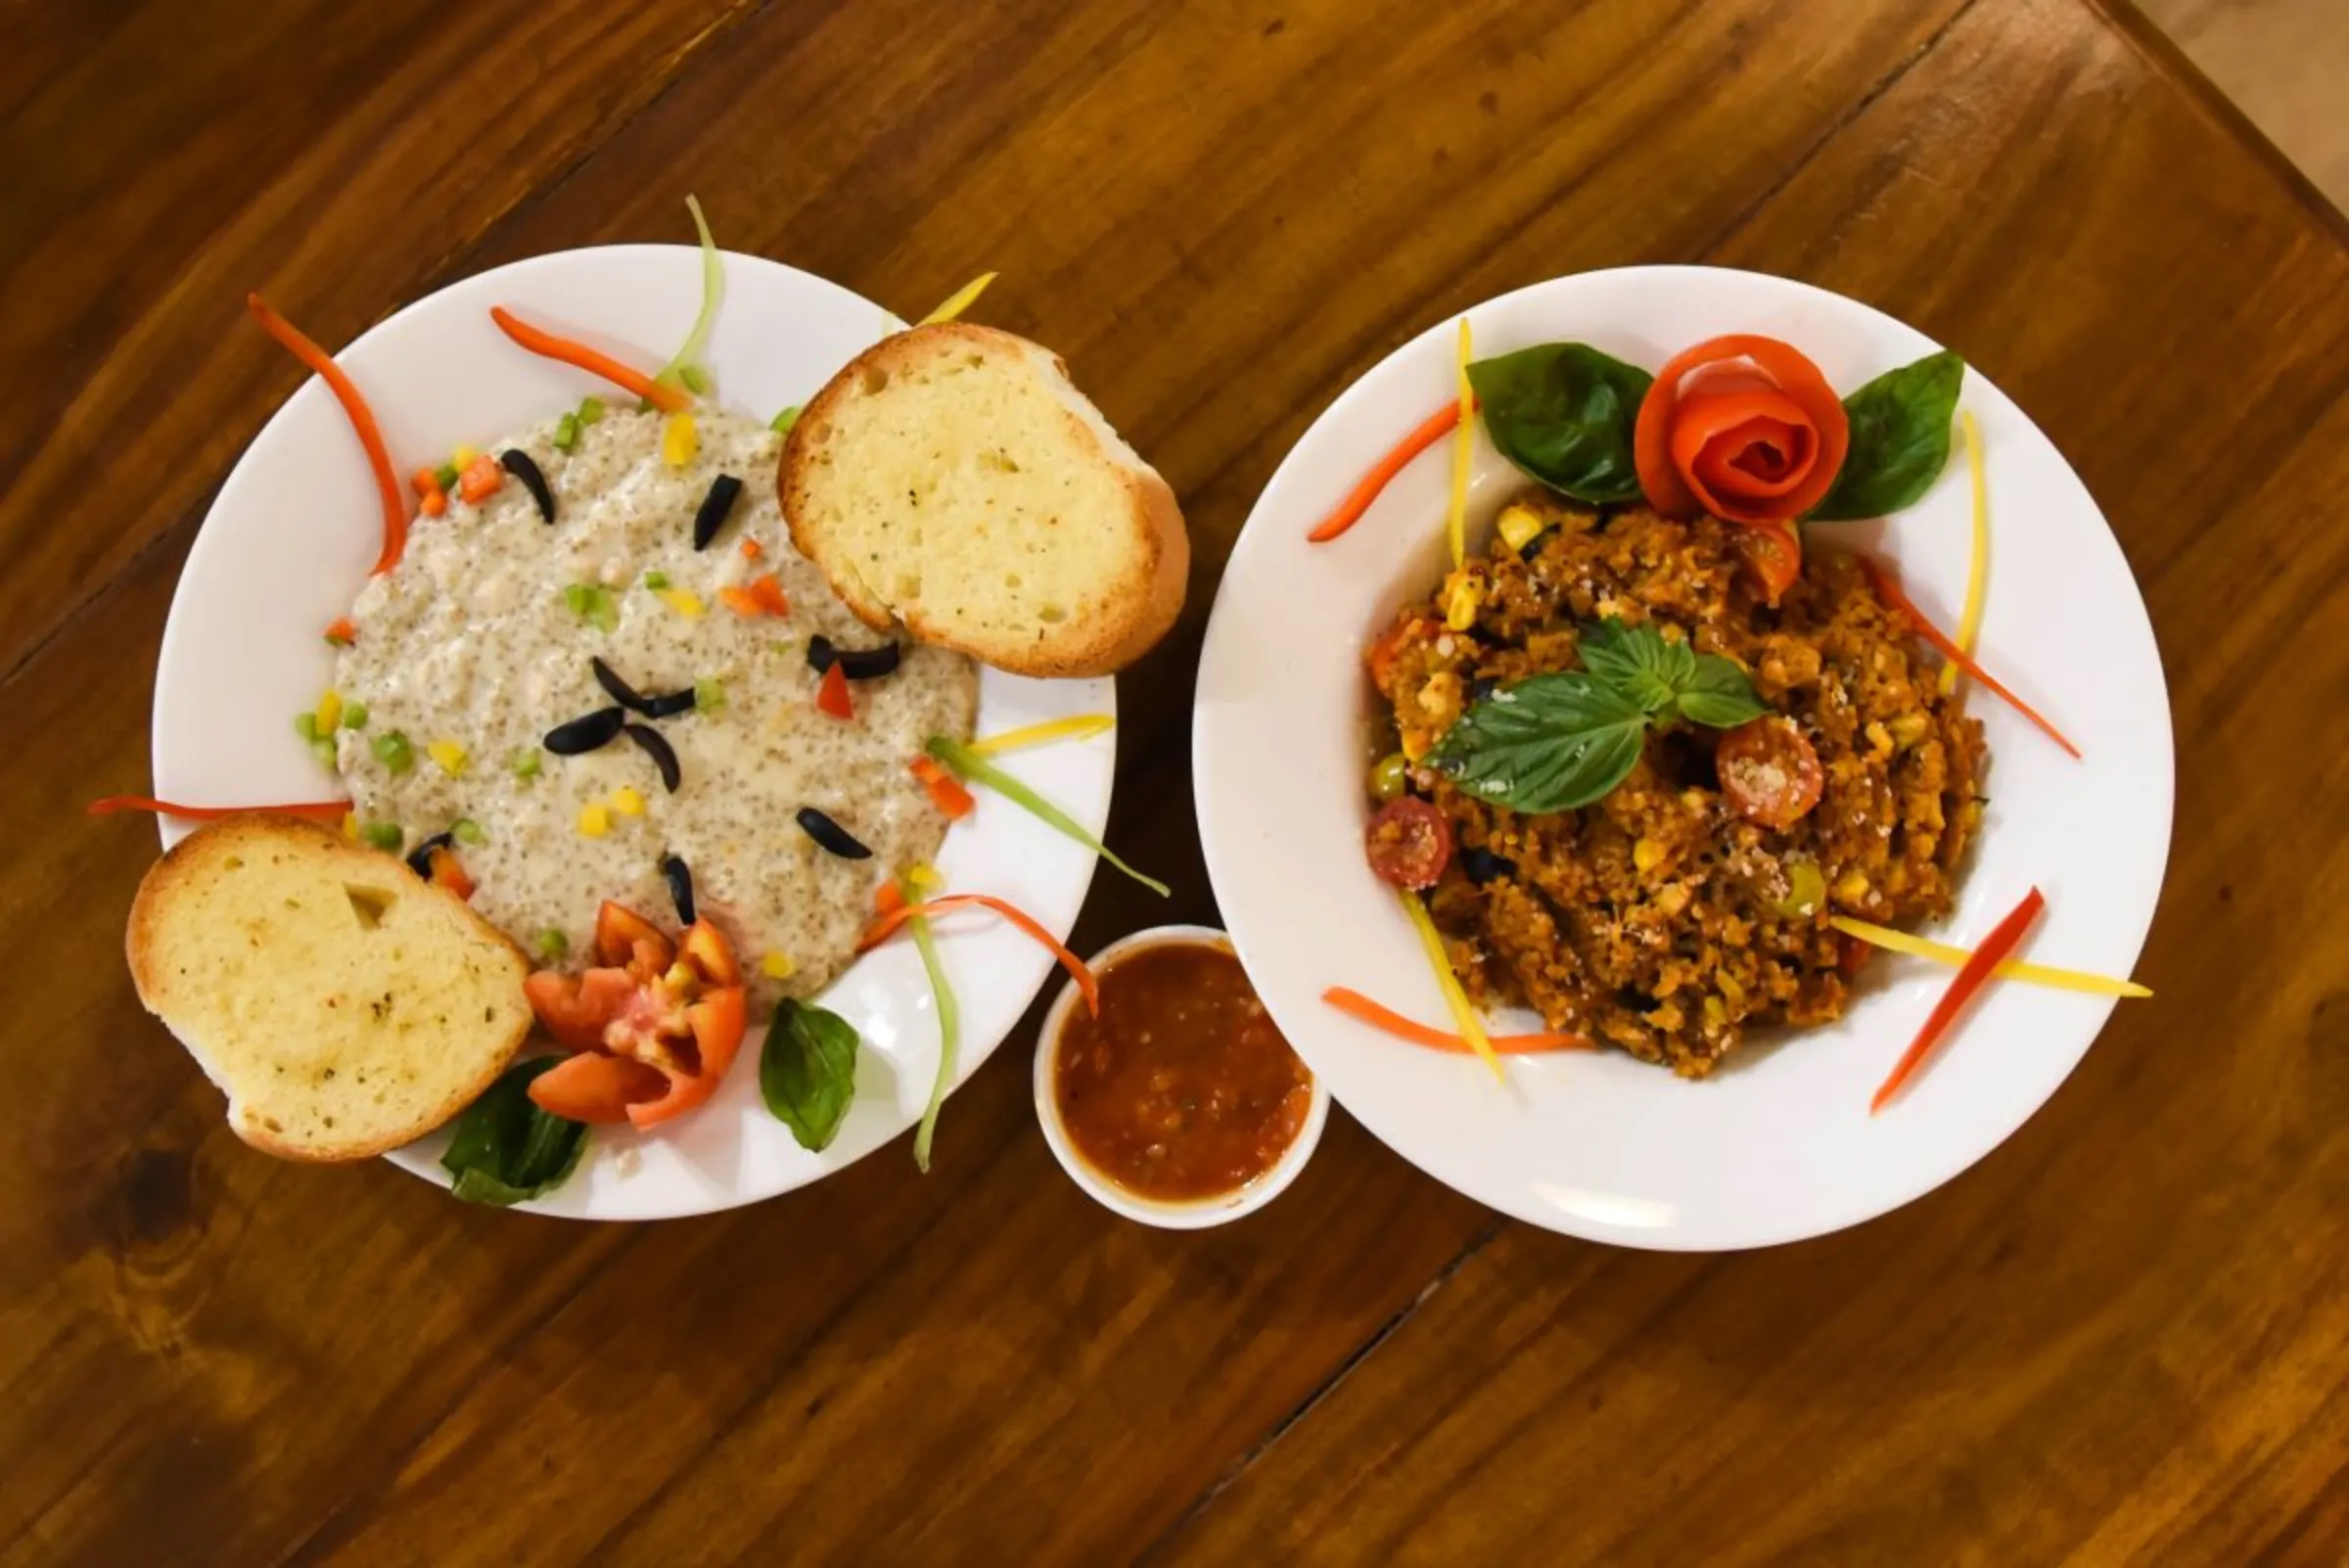 Foxtail millet dishes including Mexican rice where the rice is substituted with foxtail millet served at Bocca Café in Bhubaneswar, India, on July 11, 2023. Thomson Reuters Foundation/Tanmoy Bhaduri